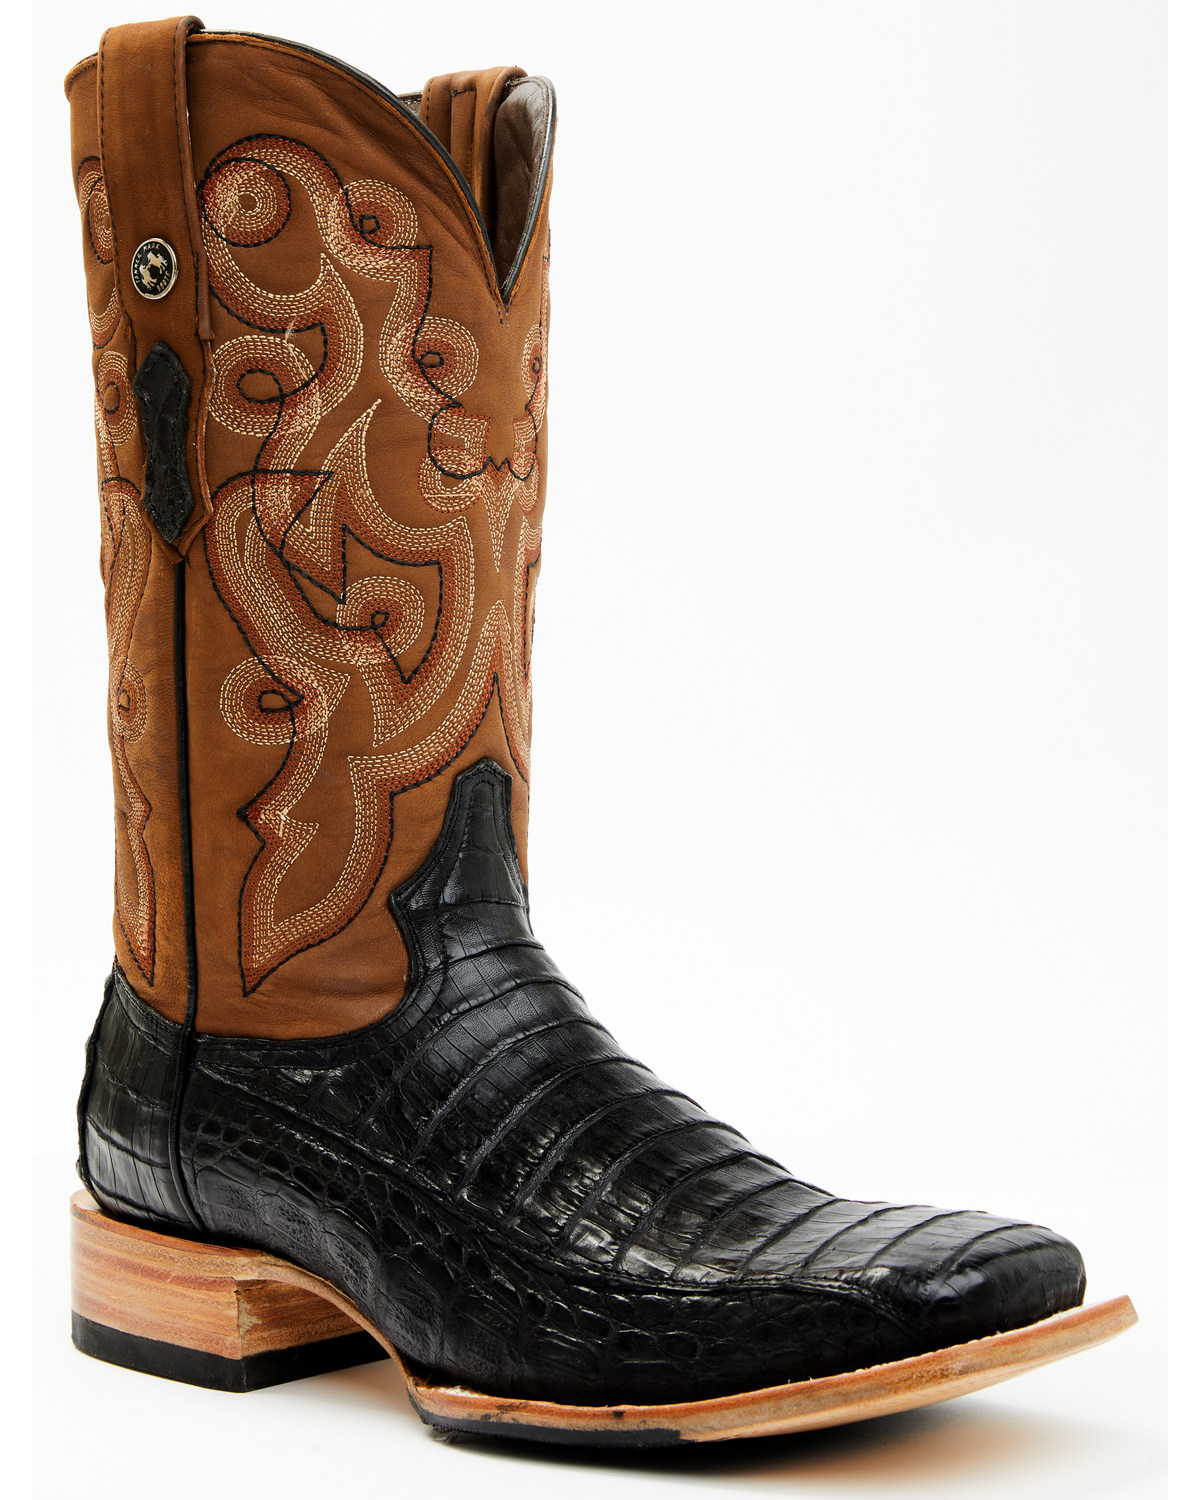 Tanner Mark Men's Exotic Caiman Belly Western Boots